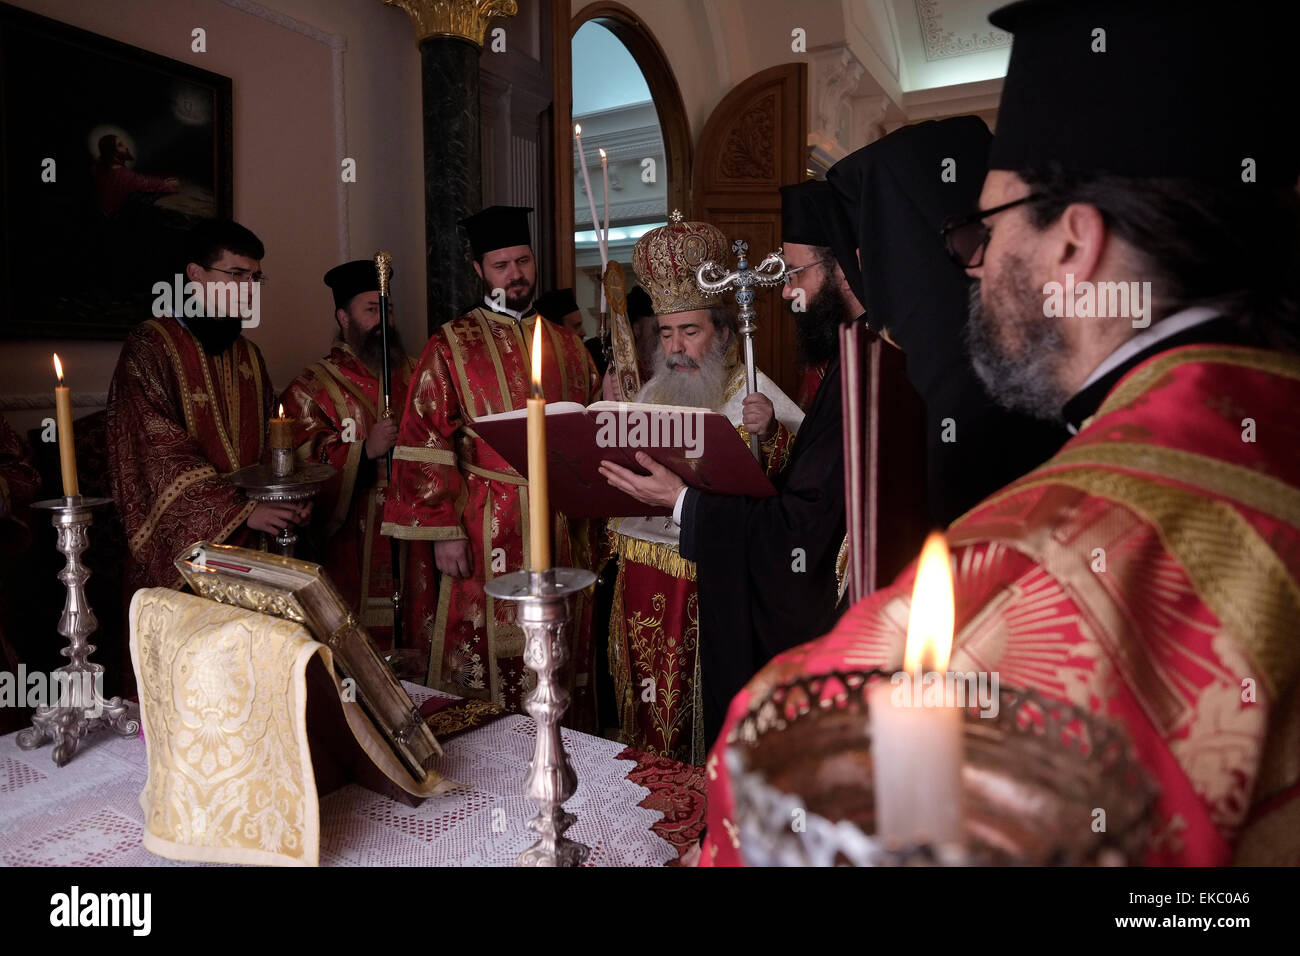 Jerusalem, Israel 9th April 2015: Greek Orthodox Patriarch of Jerusalem Theophilos III praying at the Greek Orthodox Patriarchate church soon after the 'Washing of the Feet' ceremony at the Church of the Holy Sepulchre in the old city of Jerusalem on April 09, 2015, Christians around the world commemorate events around the crucifixion of Jesus Christ, leading up to his resurrection on Easter. Credit:  Eddie Gerald/Alamy Live News Stock Photo